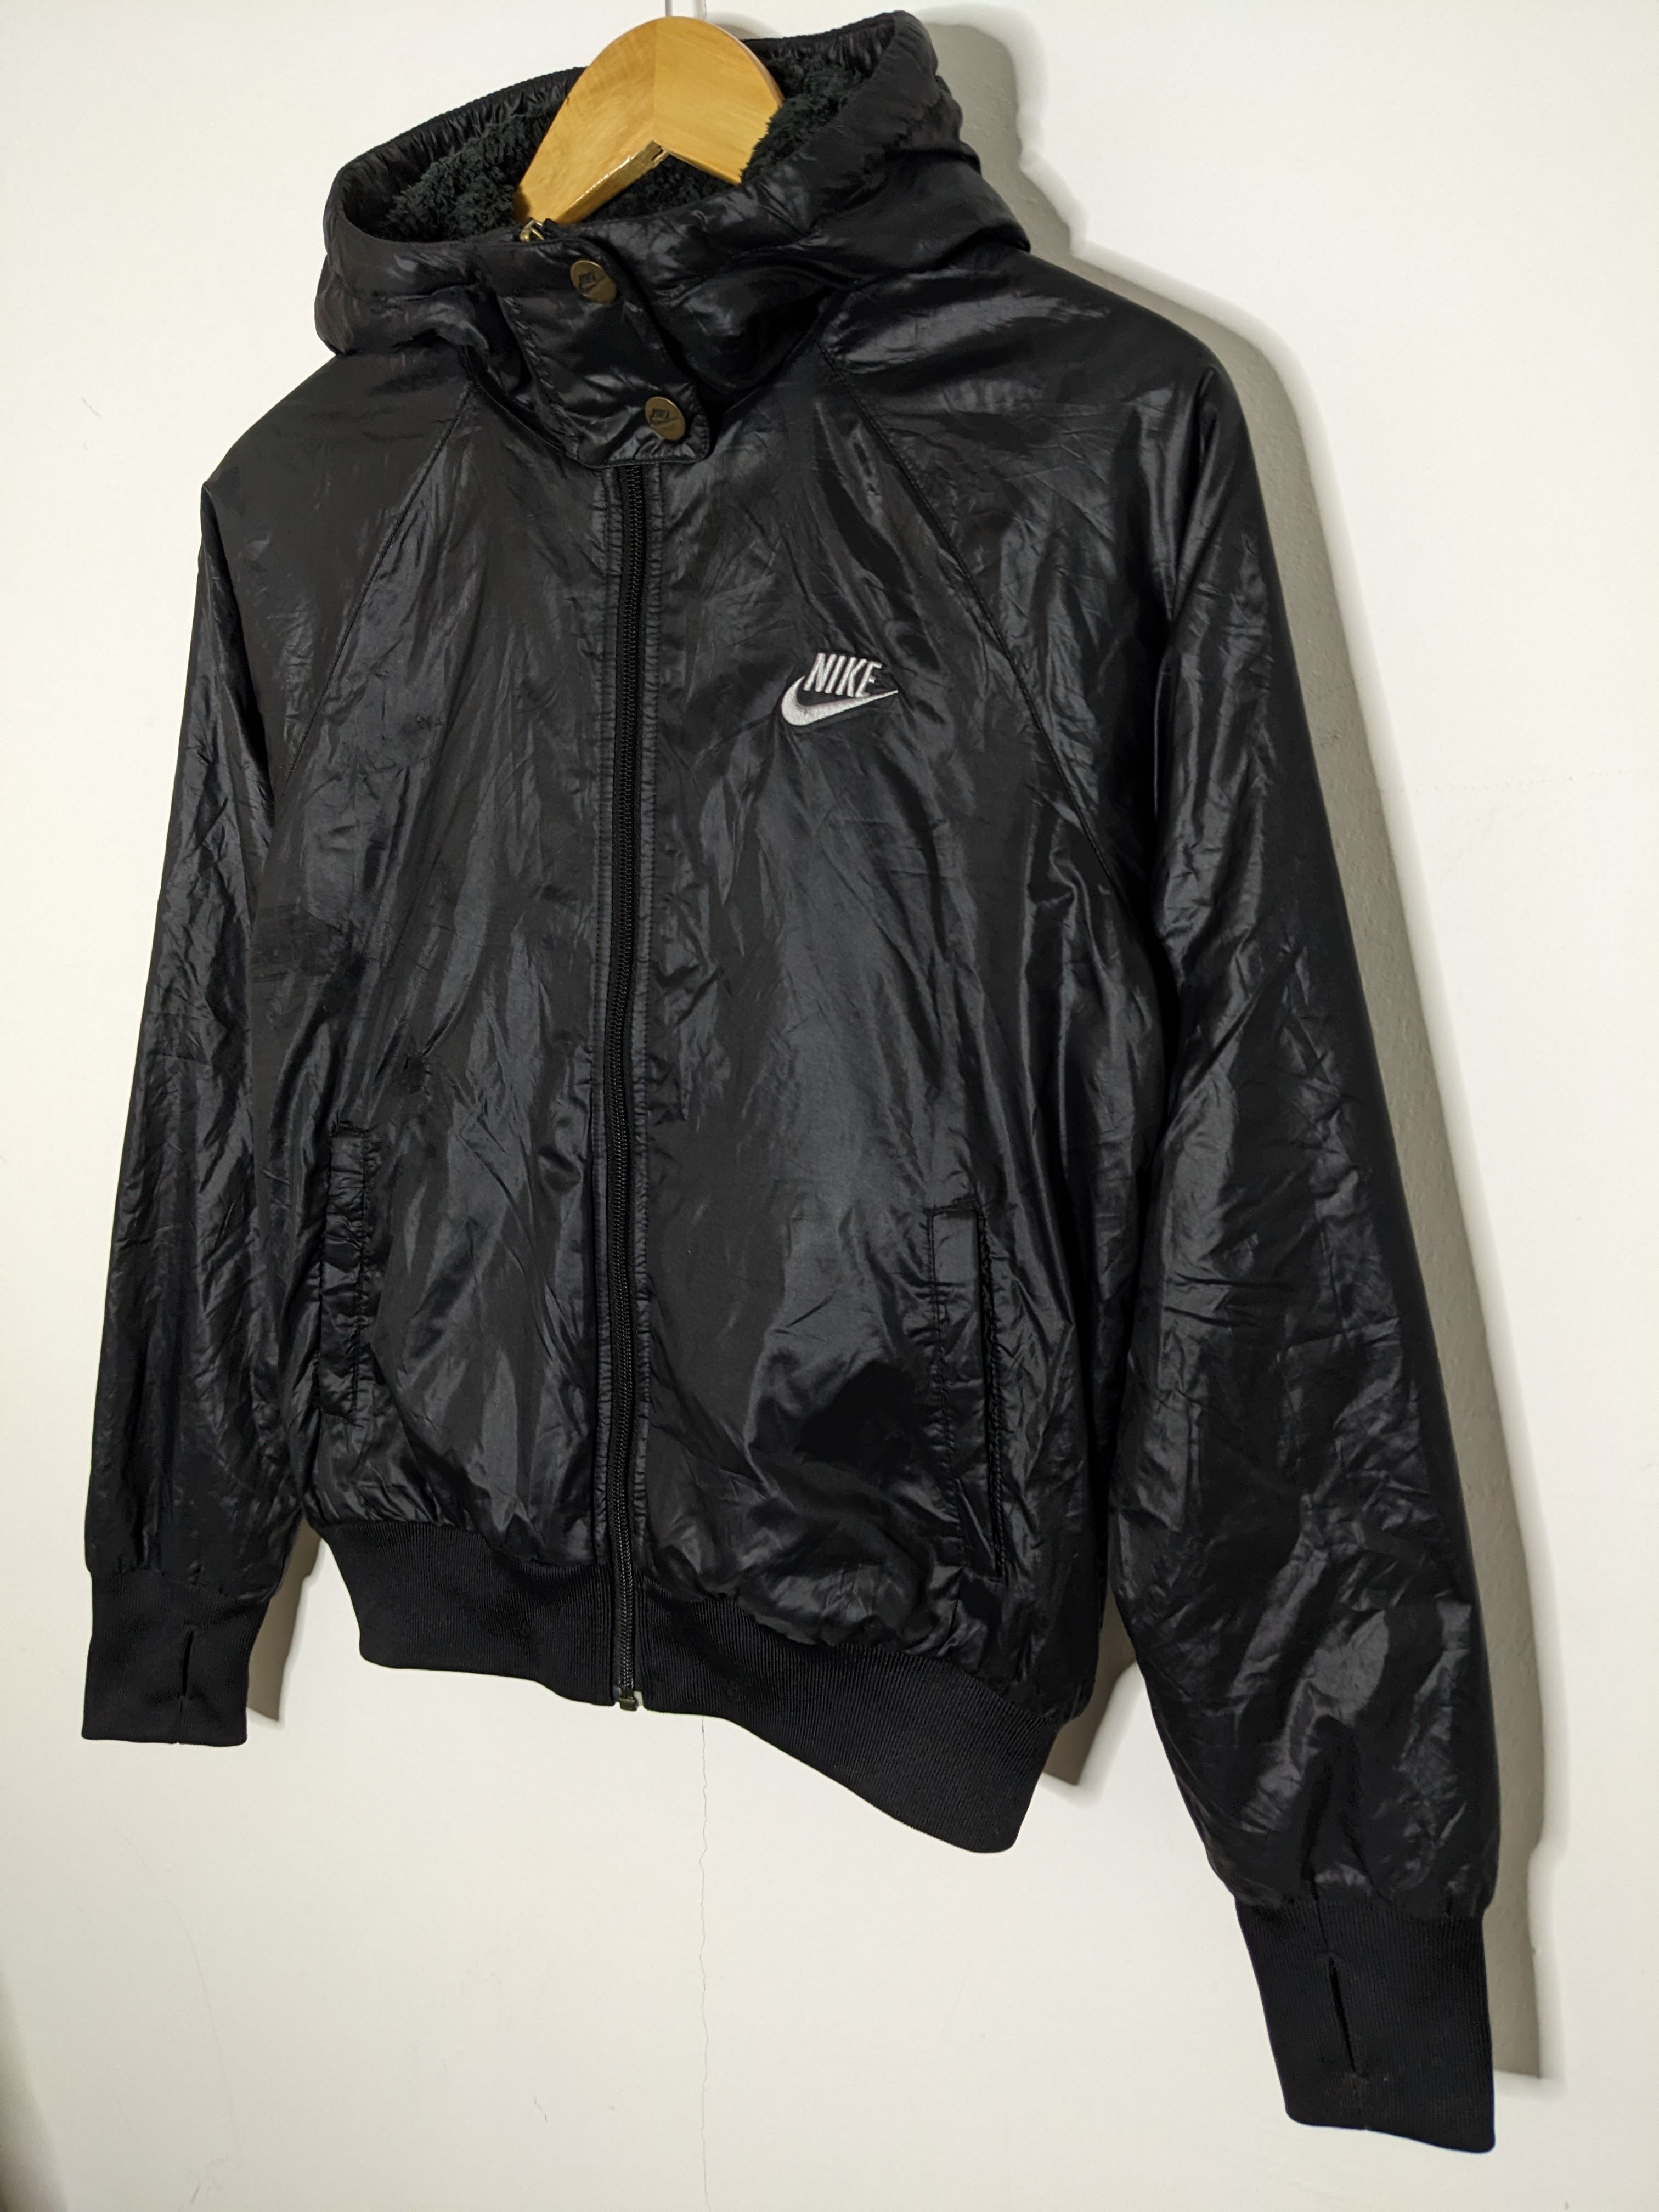 Nike Black Sherpa Lined Jacket Hooded Synthetic Fill Zip Up - 2